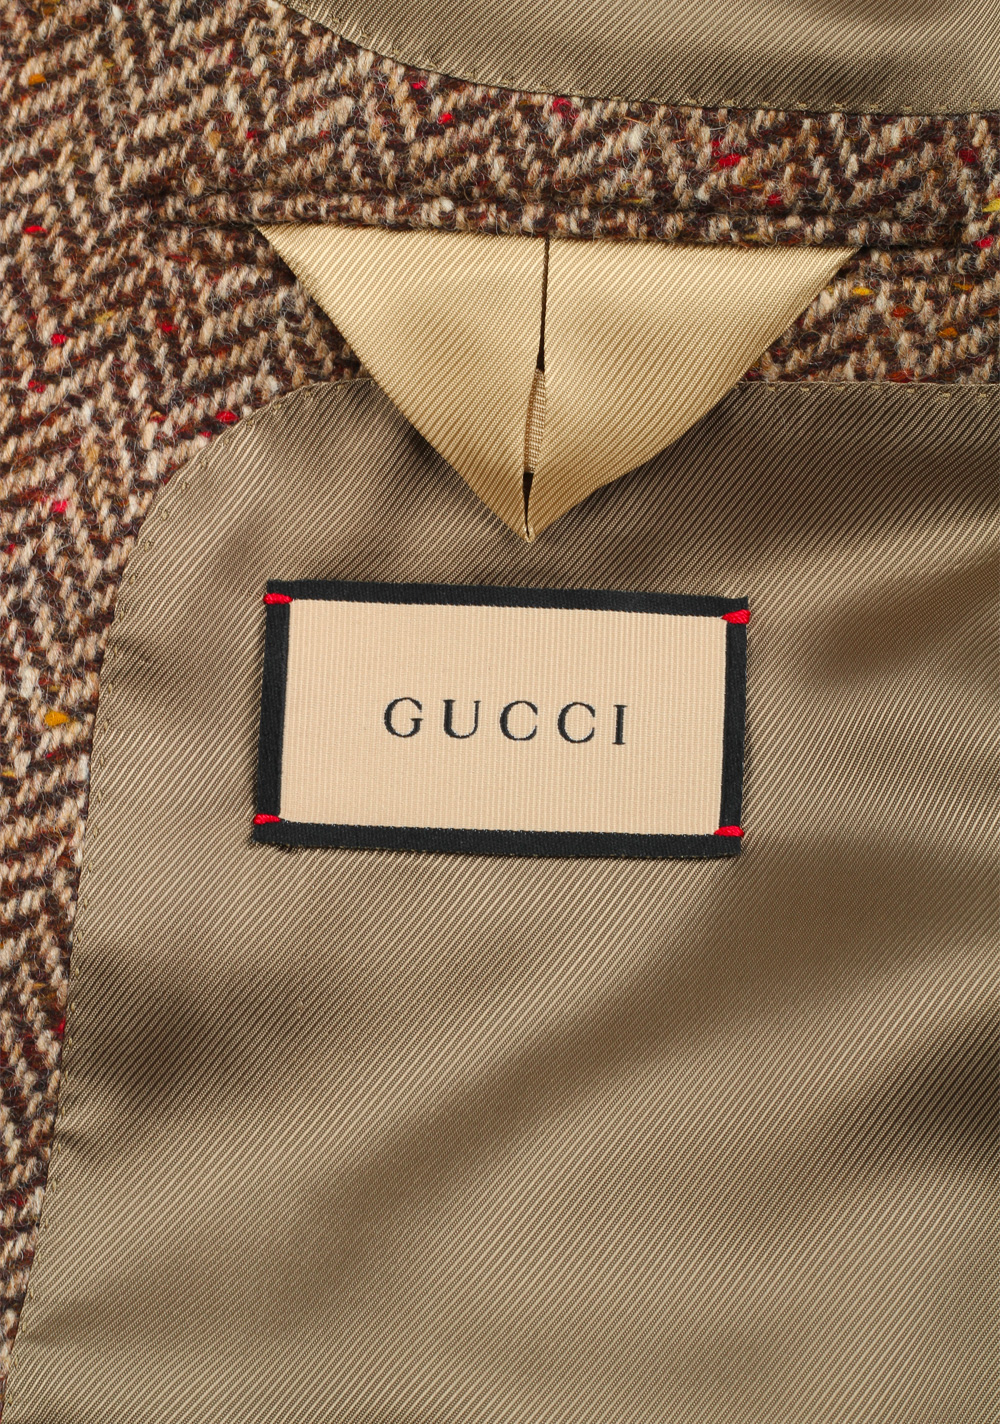 Gucci Brown Double Breasted Wool Coat | Costume Limité